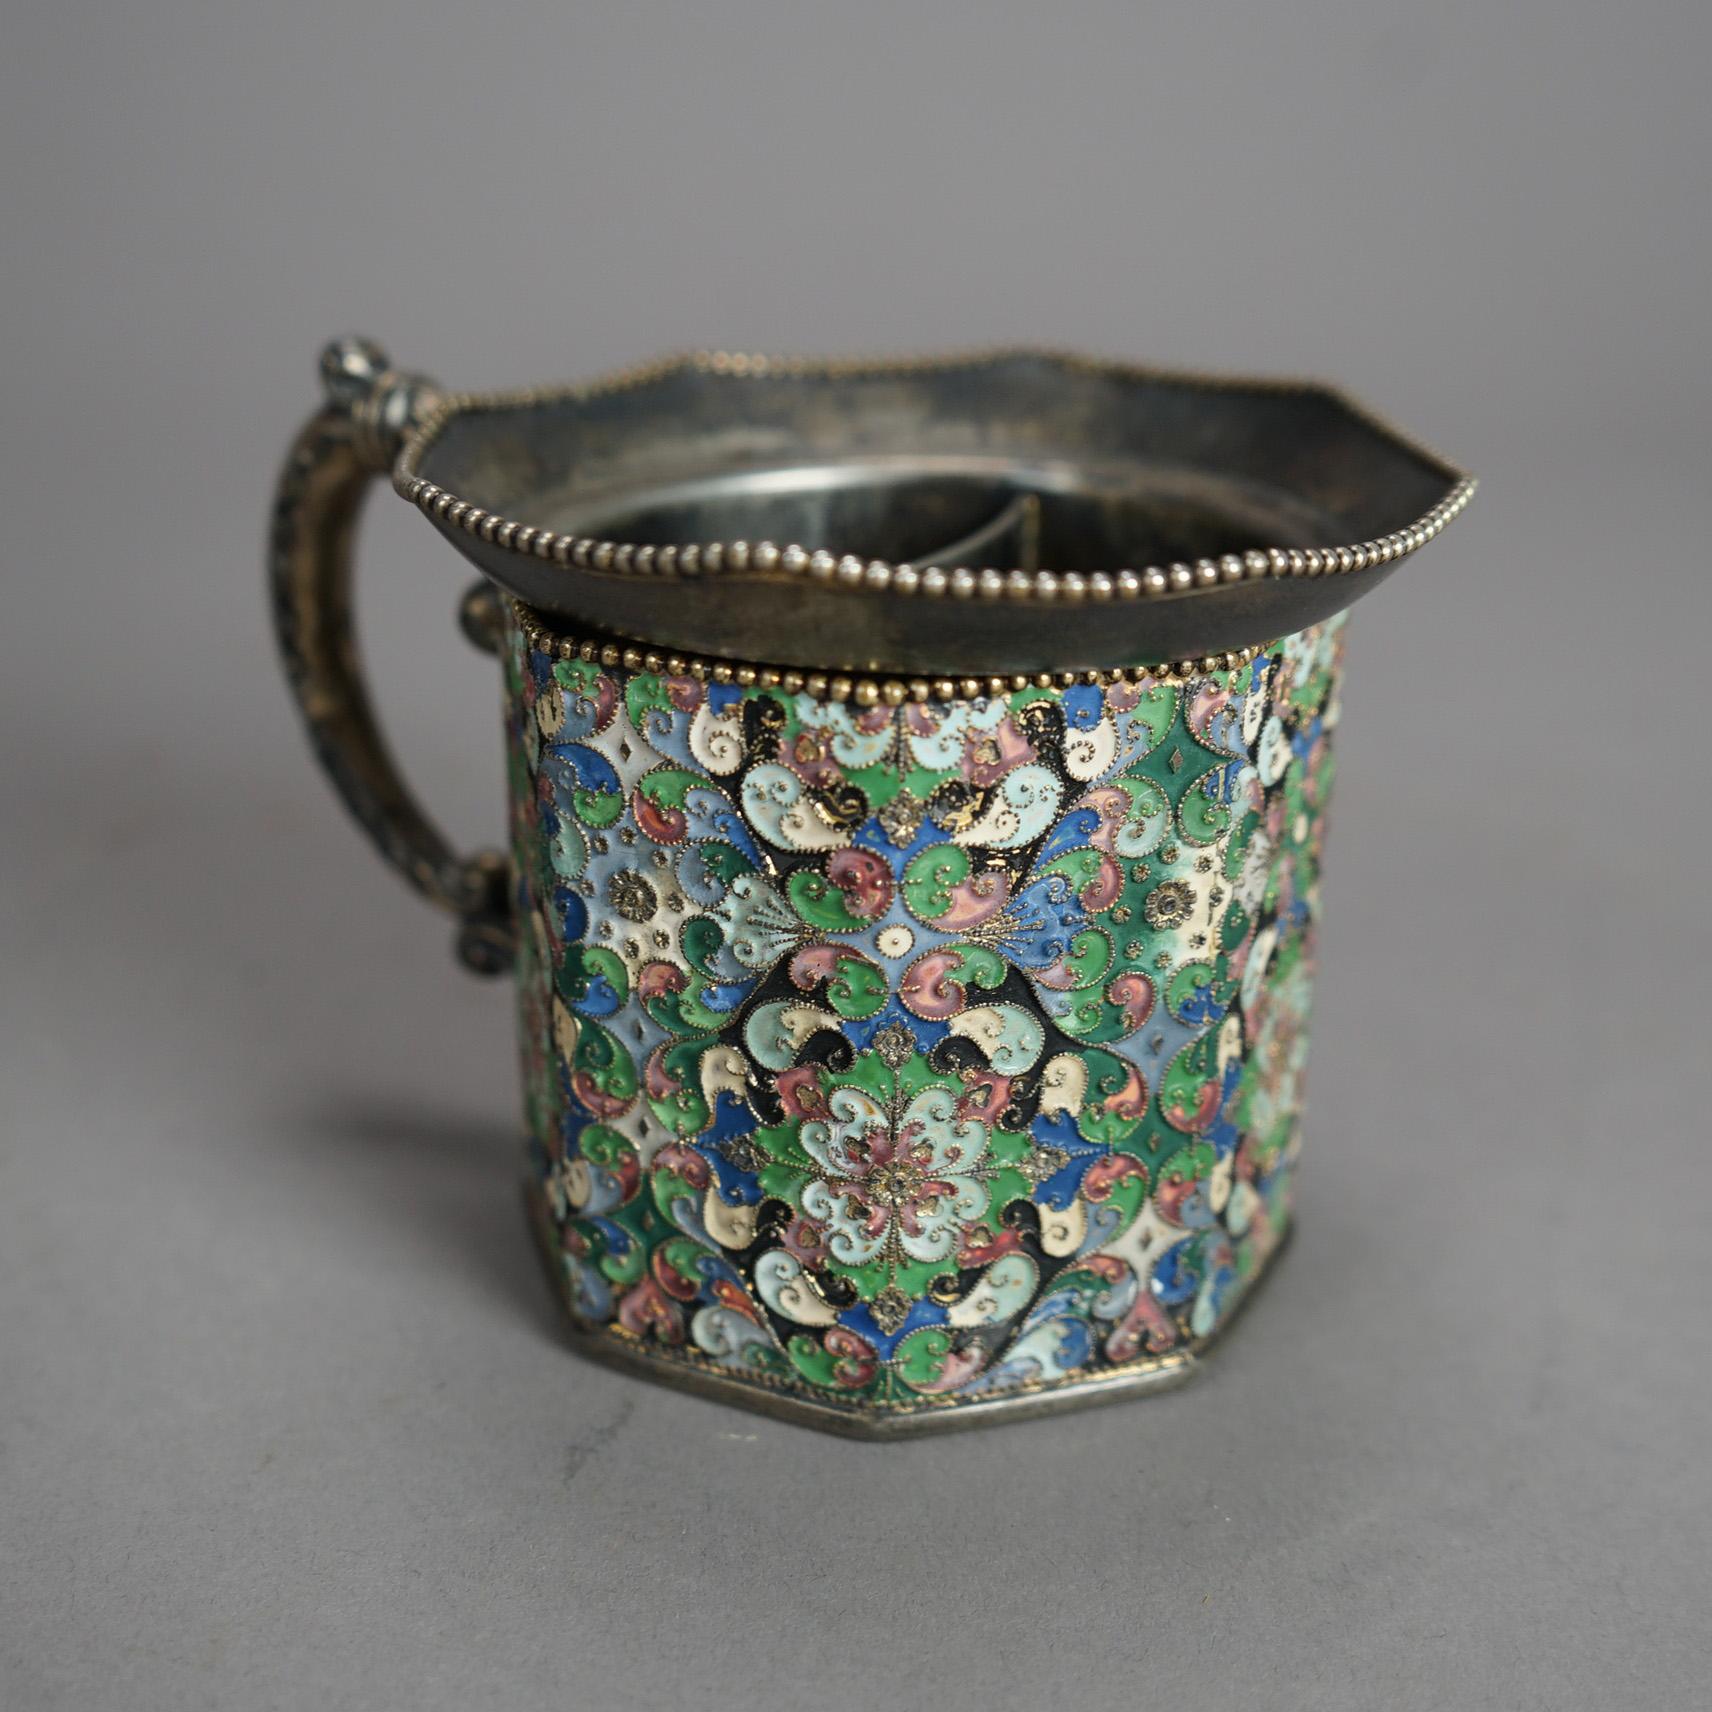 An antique Victorian Russian enameled silver plate shaving mug offers octagonal form with insert, 19th century

Measures - 3.5